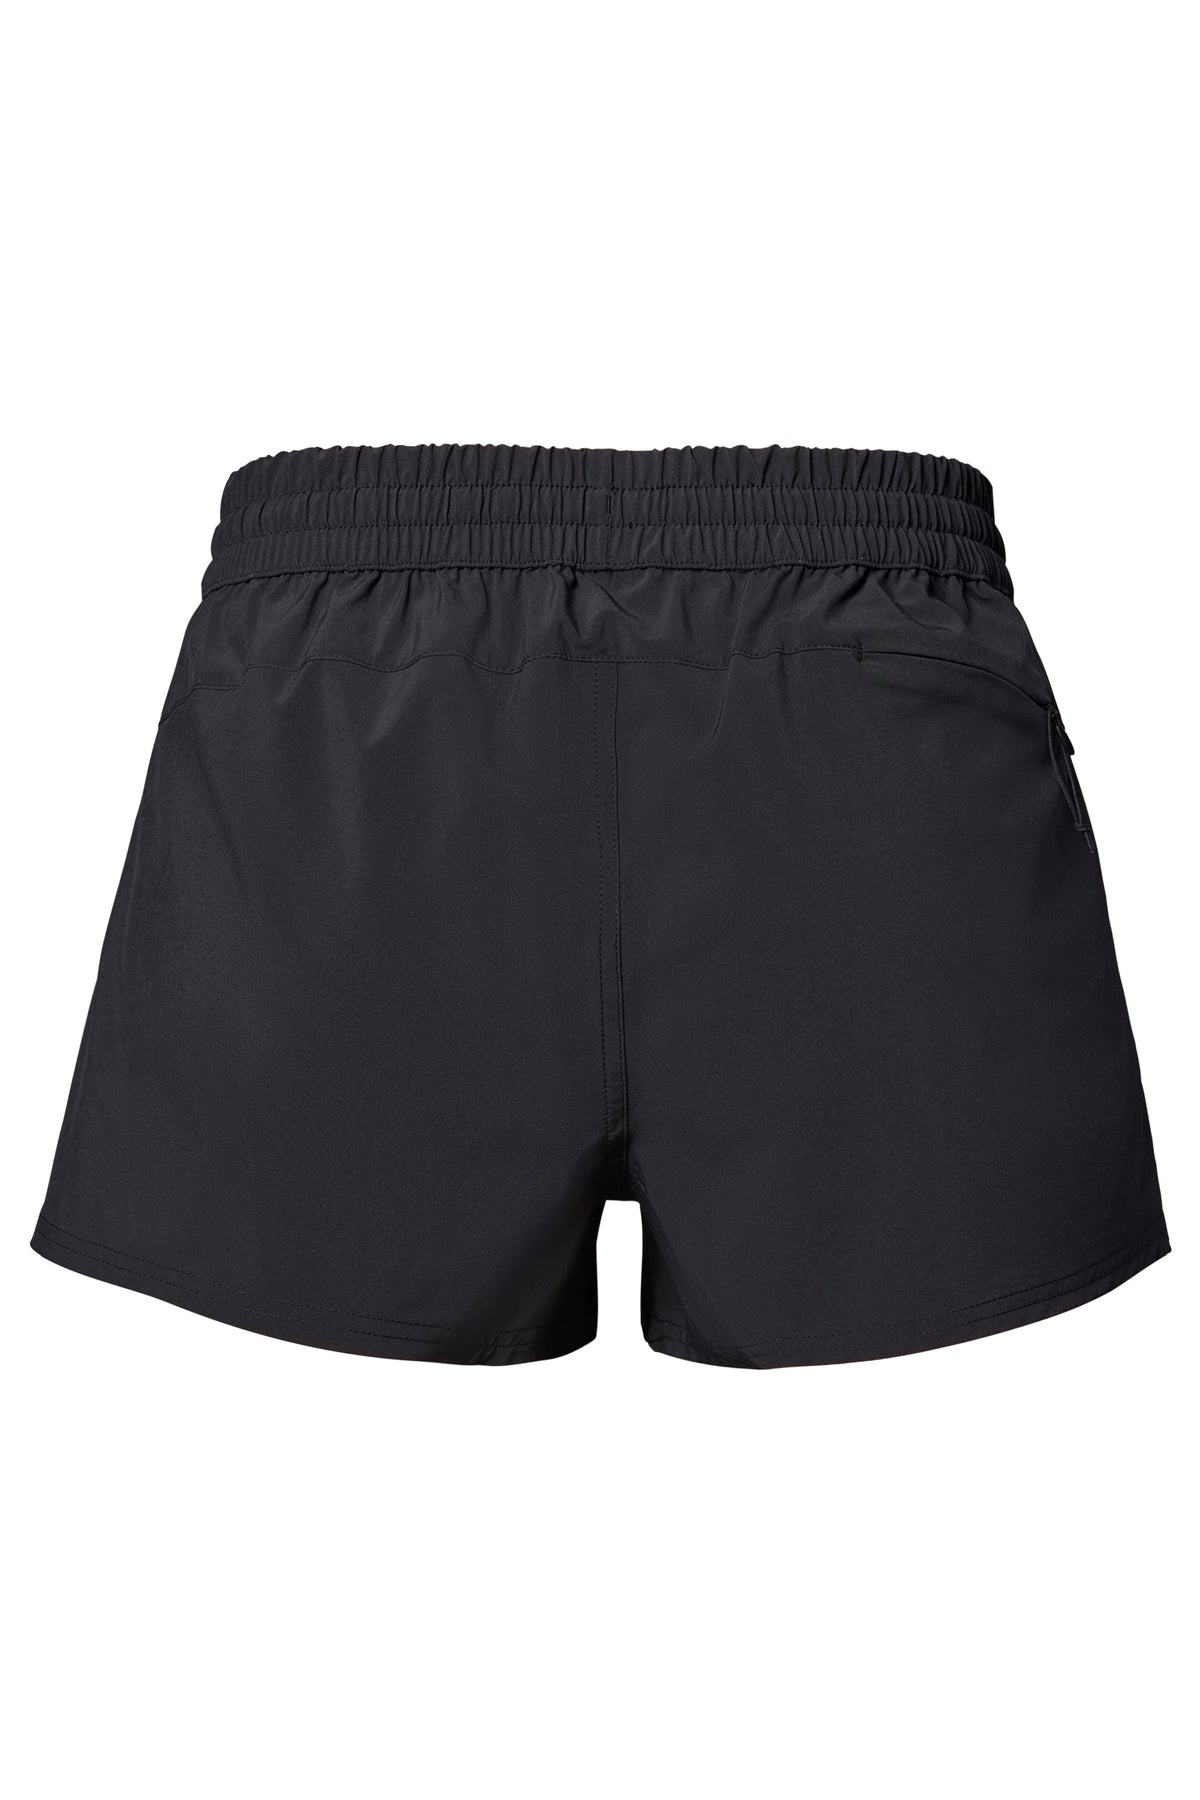 These $24 Drawstring Shorts Are Perfect for Summer